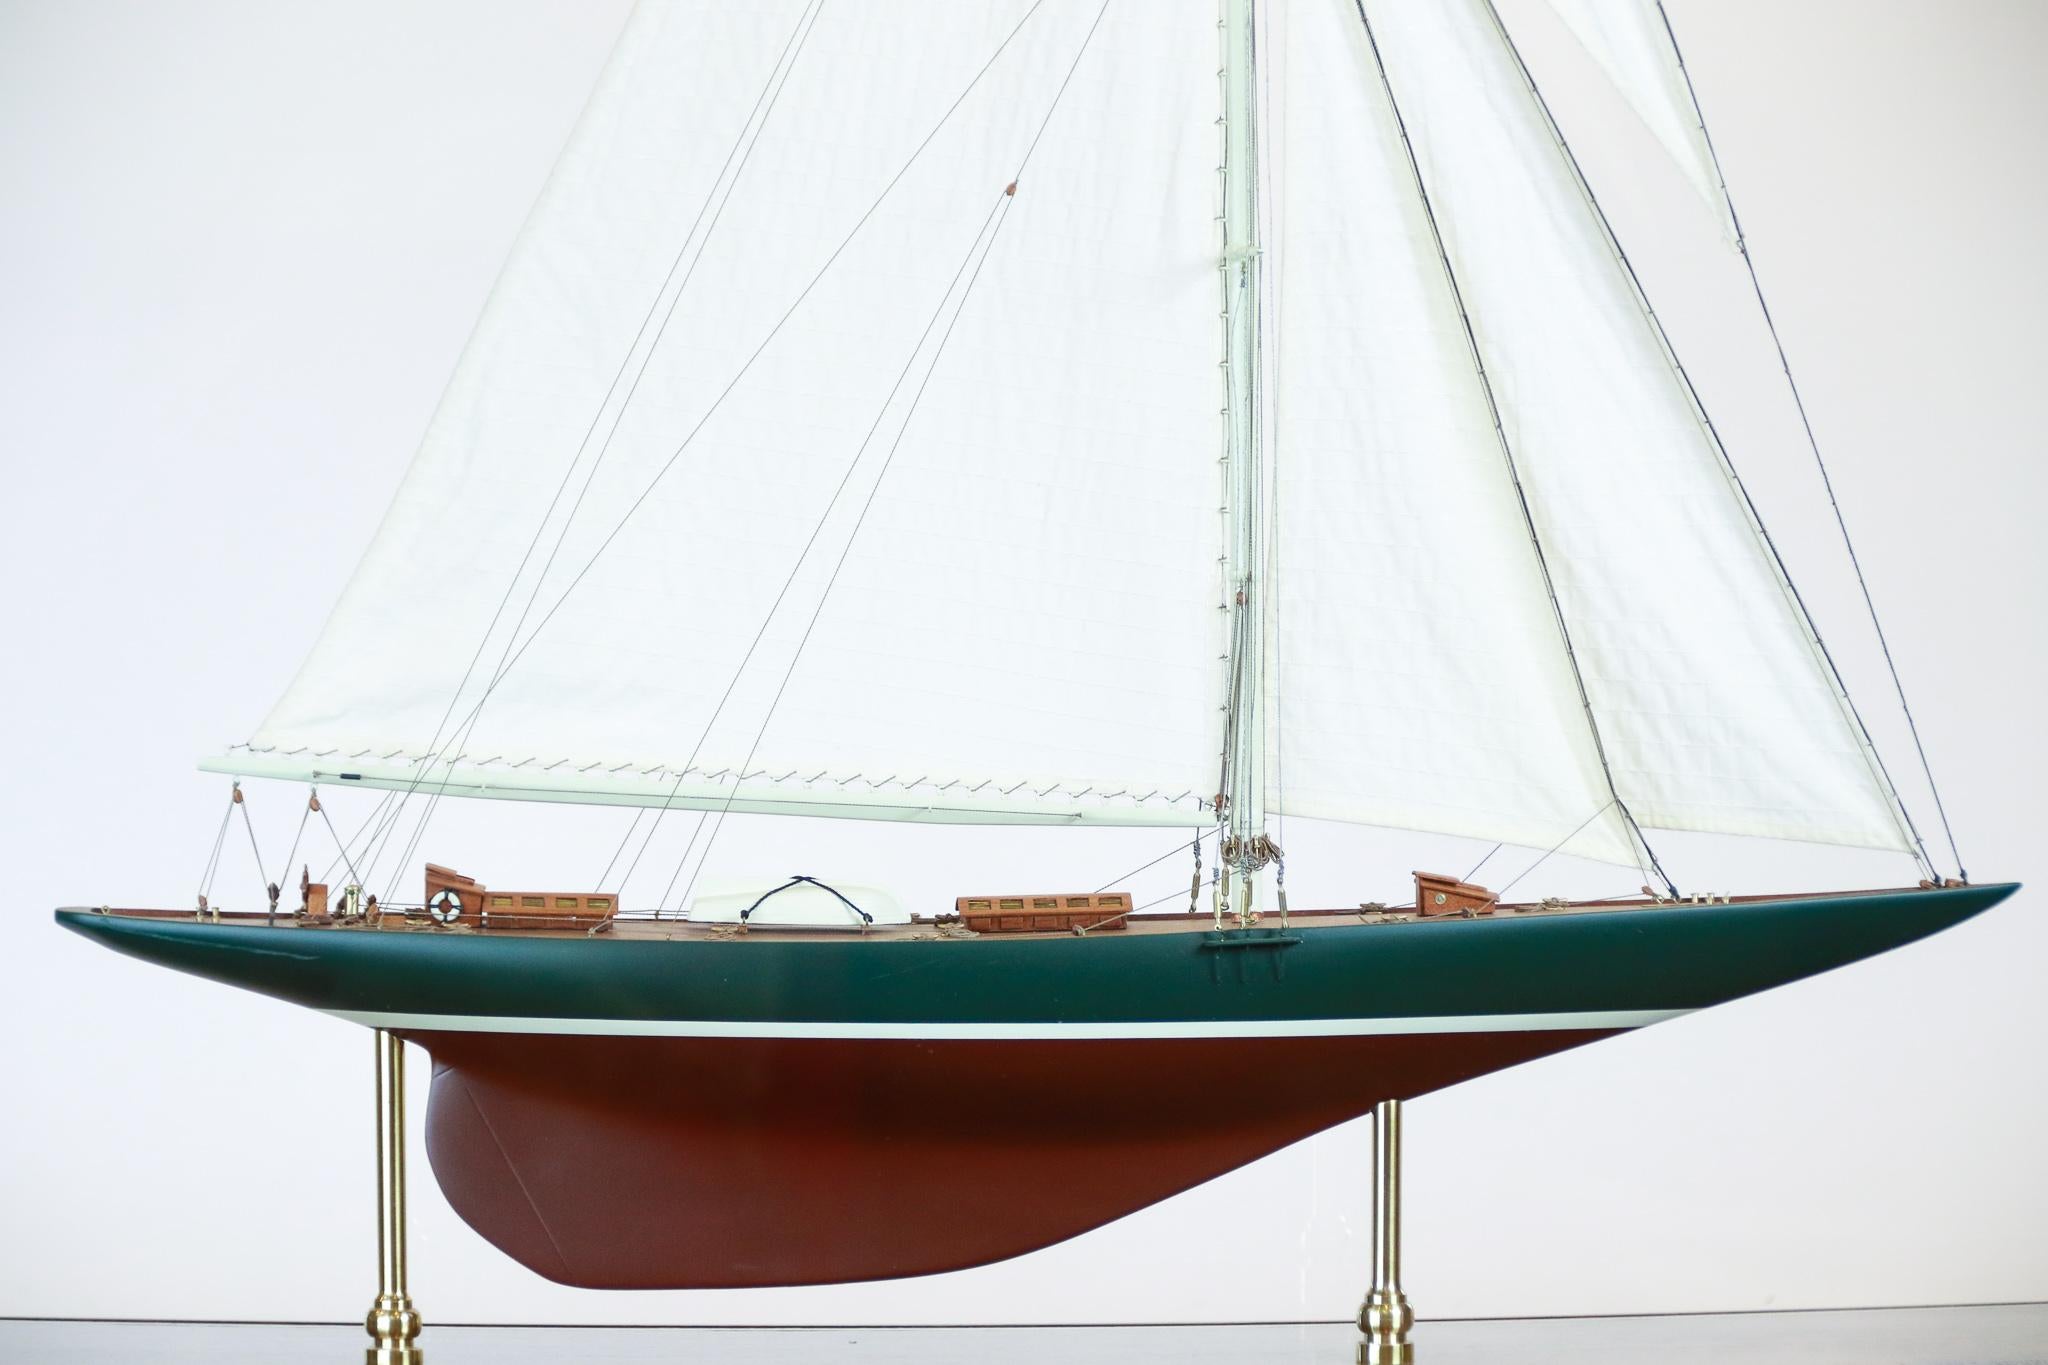 Model of Sir Thomas Lipton's America's Cup challenger Shamrock V. Deck is detailed with lifeboat, rope, cabins, hatches, binnacle, capstan, wheel and others. Model is mounted into a brass trimmed case. A custom table Stand is available and not